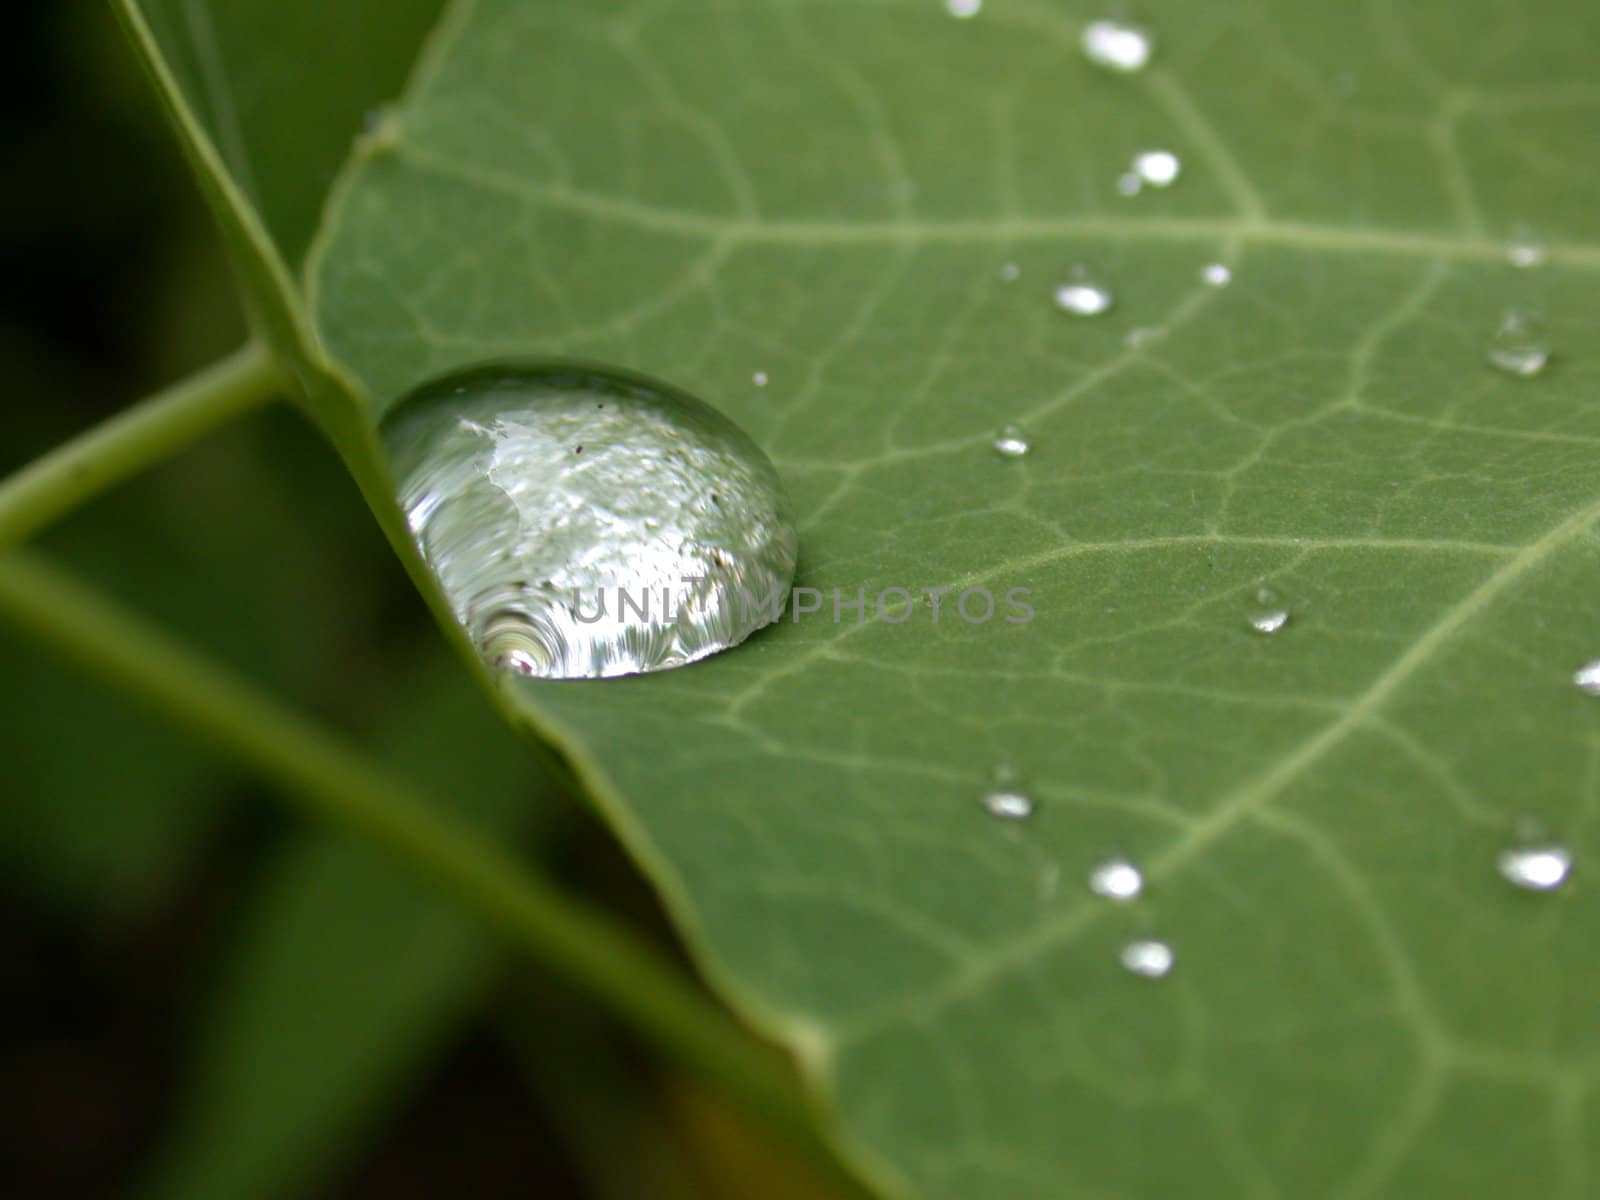 The drop of water on leaf. After rain.